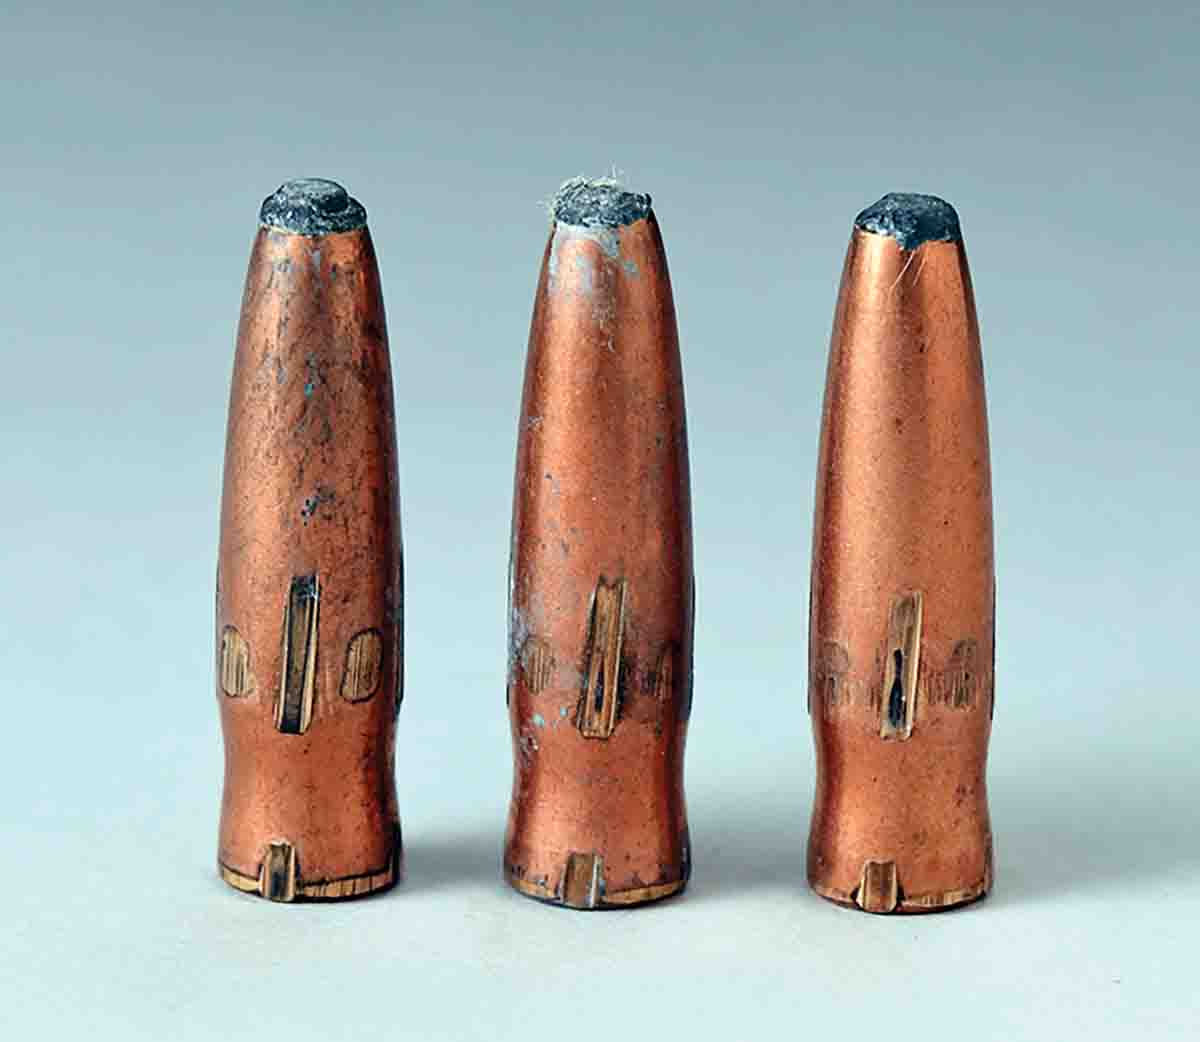 These Wasp Waist bullets were fired at a reduced velocity of 996 fps to illustrate bearing surface.